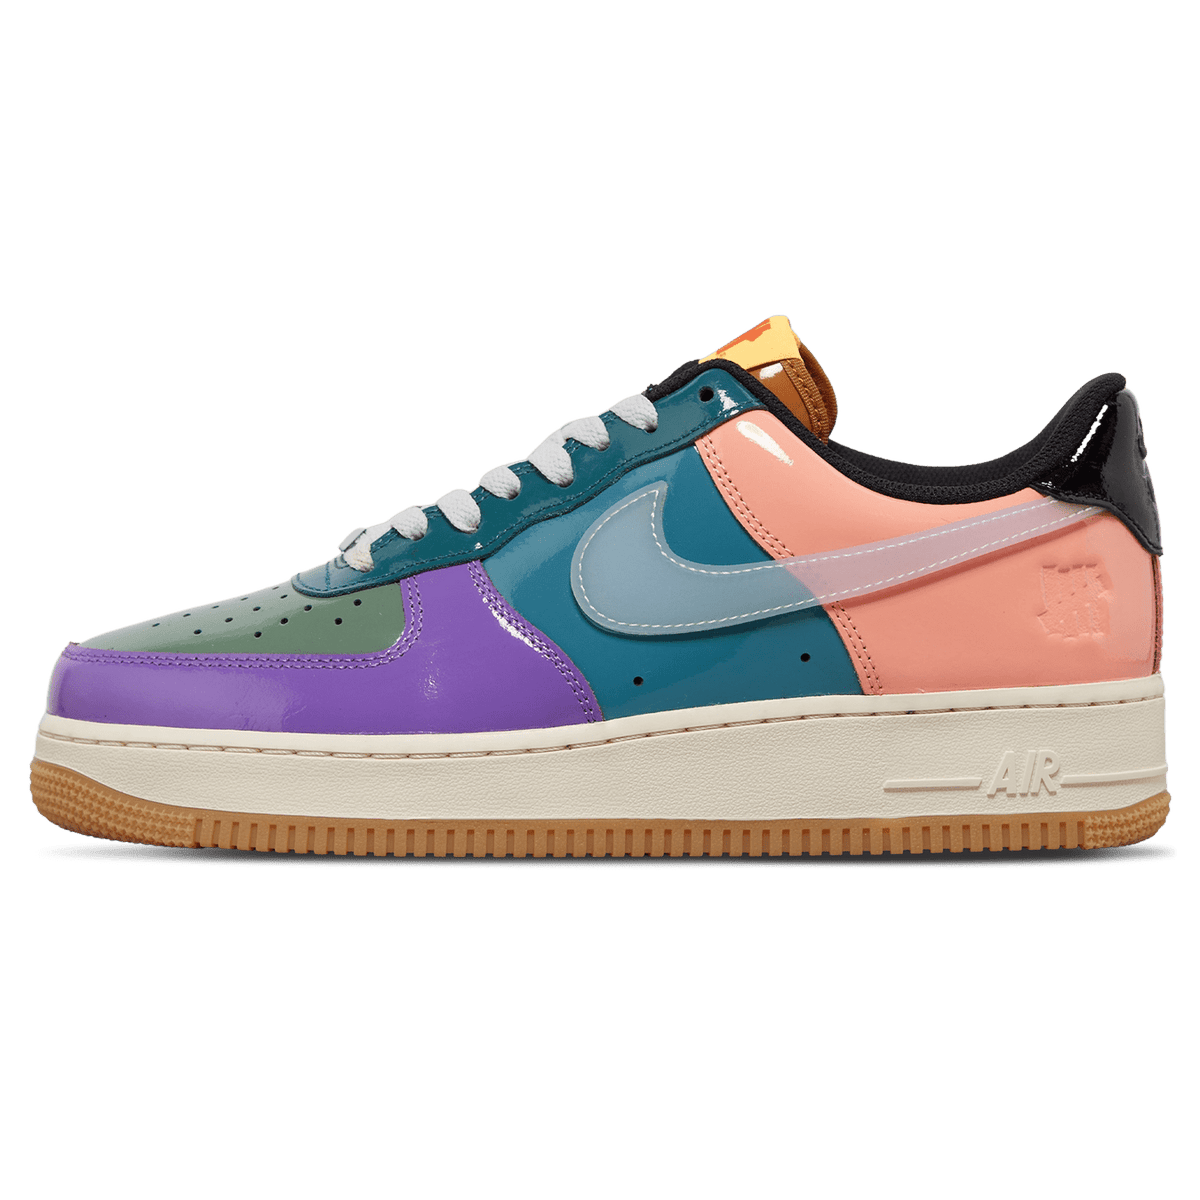 Undefeated x Nike Air Force 1 Low 'Celestine Blue' - CerbeShops